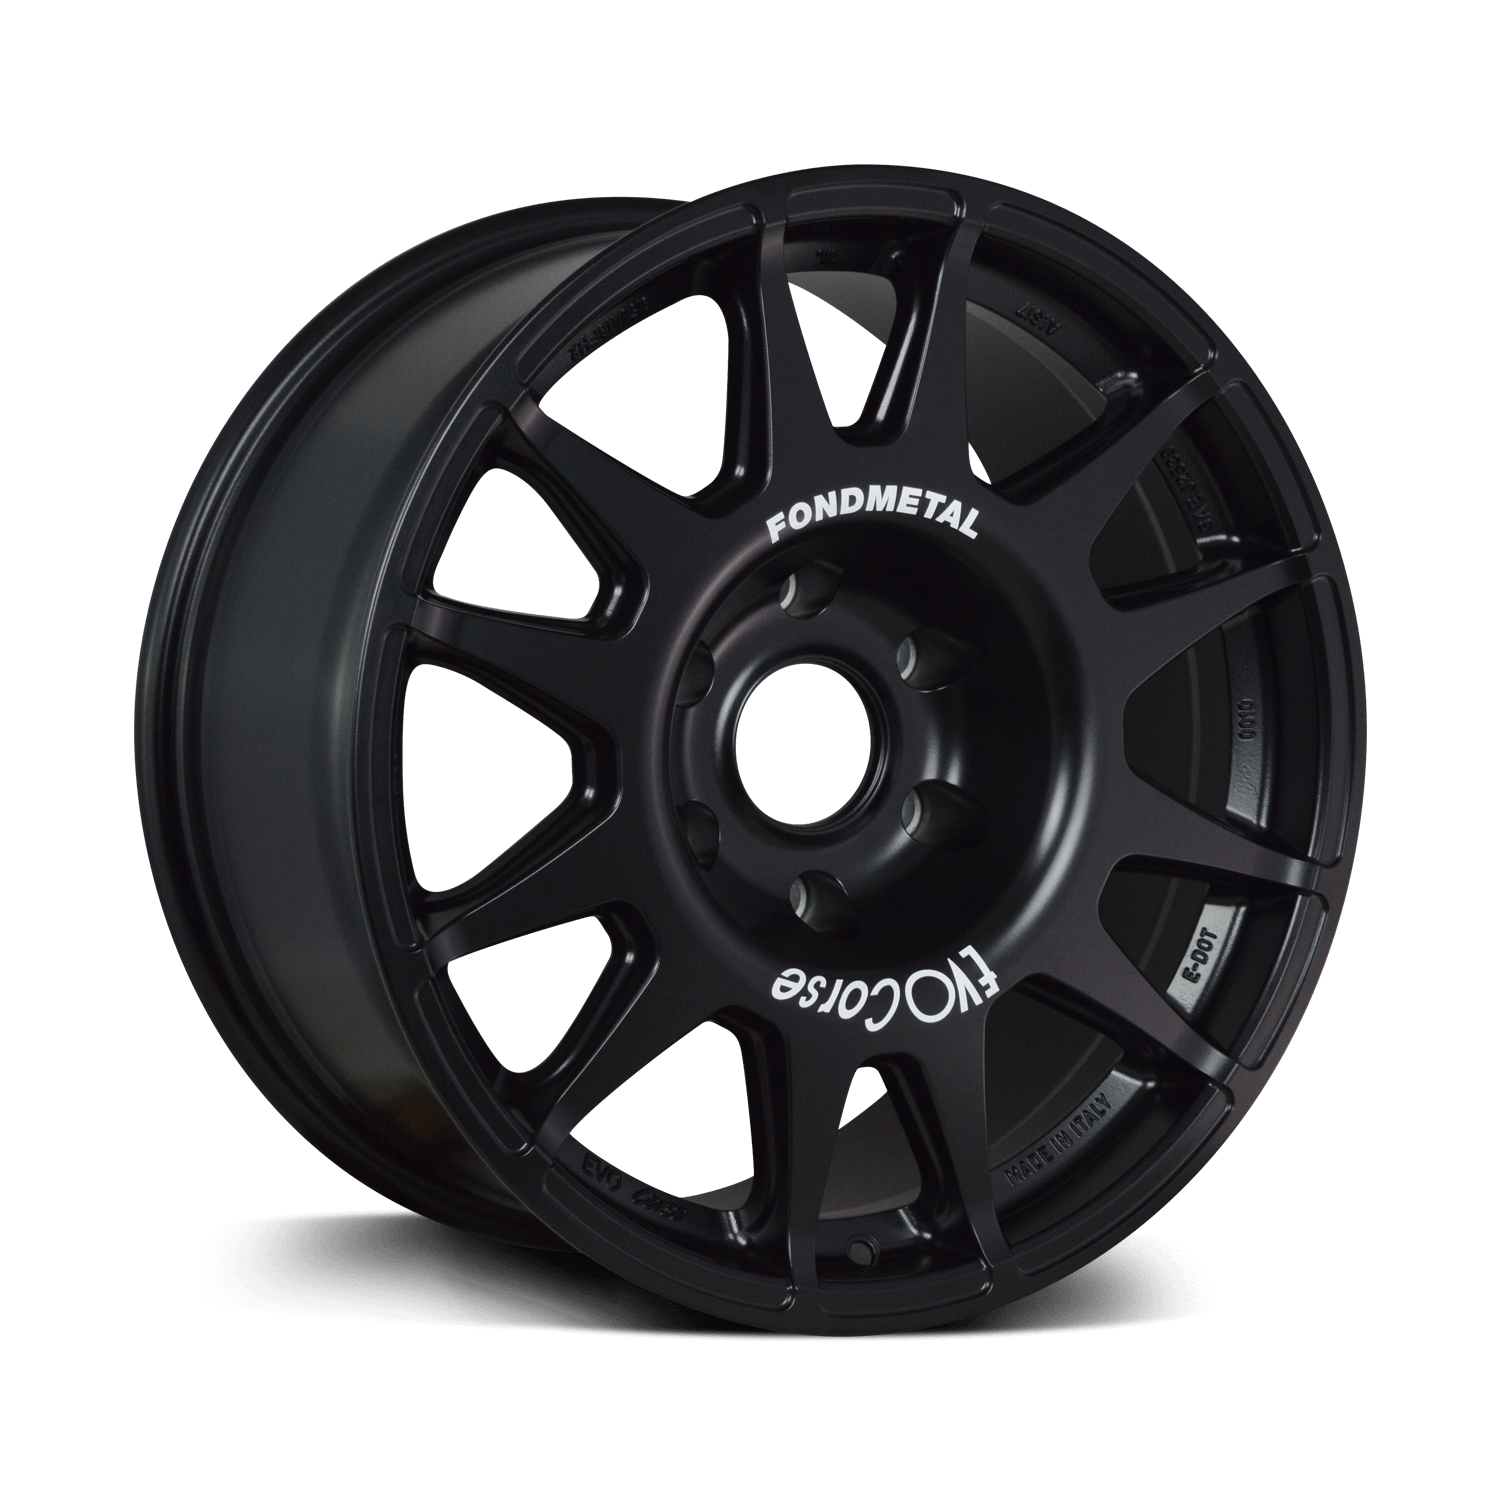 Evo Corse wheel axo view matt black, for toyota land cruiser 300 series, anthracite. the 4x4 off road allow wheel with the highest high load rating for overlanding, rally, 4wd expedition use in australia. lc300 wheels, 300 series wheels, 300 series landcruiser wheels, what is the best offset for you land cruiser 300 wheels? This 18x8.5 ET47